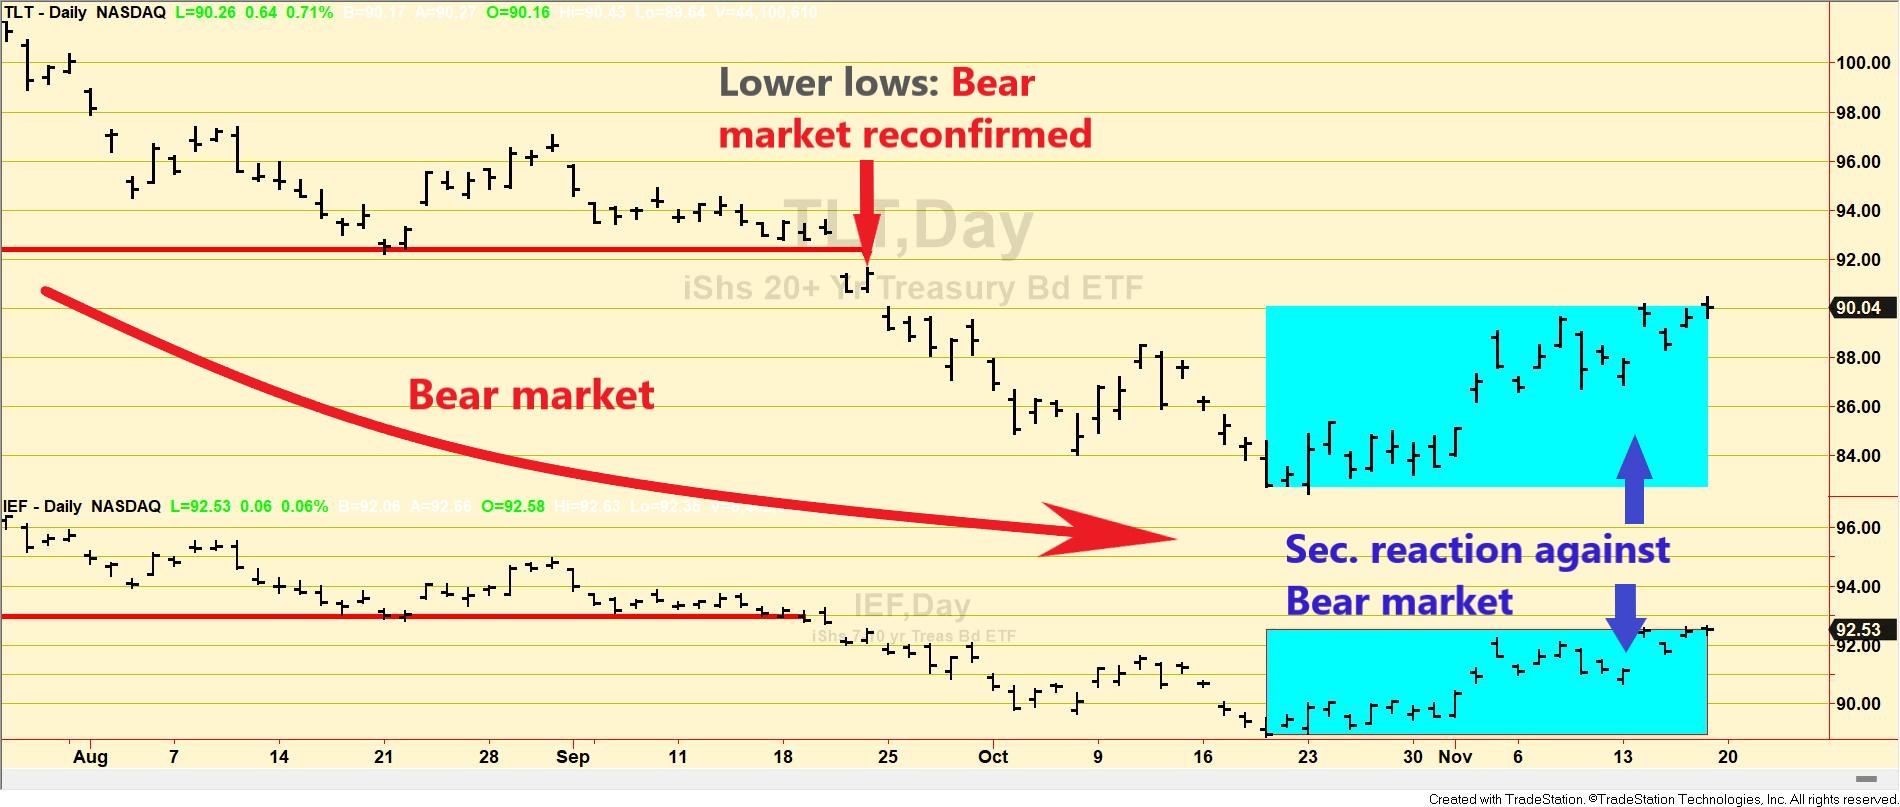 Dow Theory Update for November 18: U.S. bonds under a secondary reaction against the still-existing bearish trend.